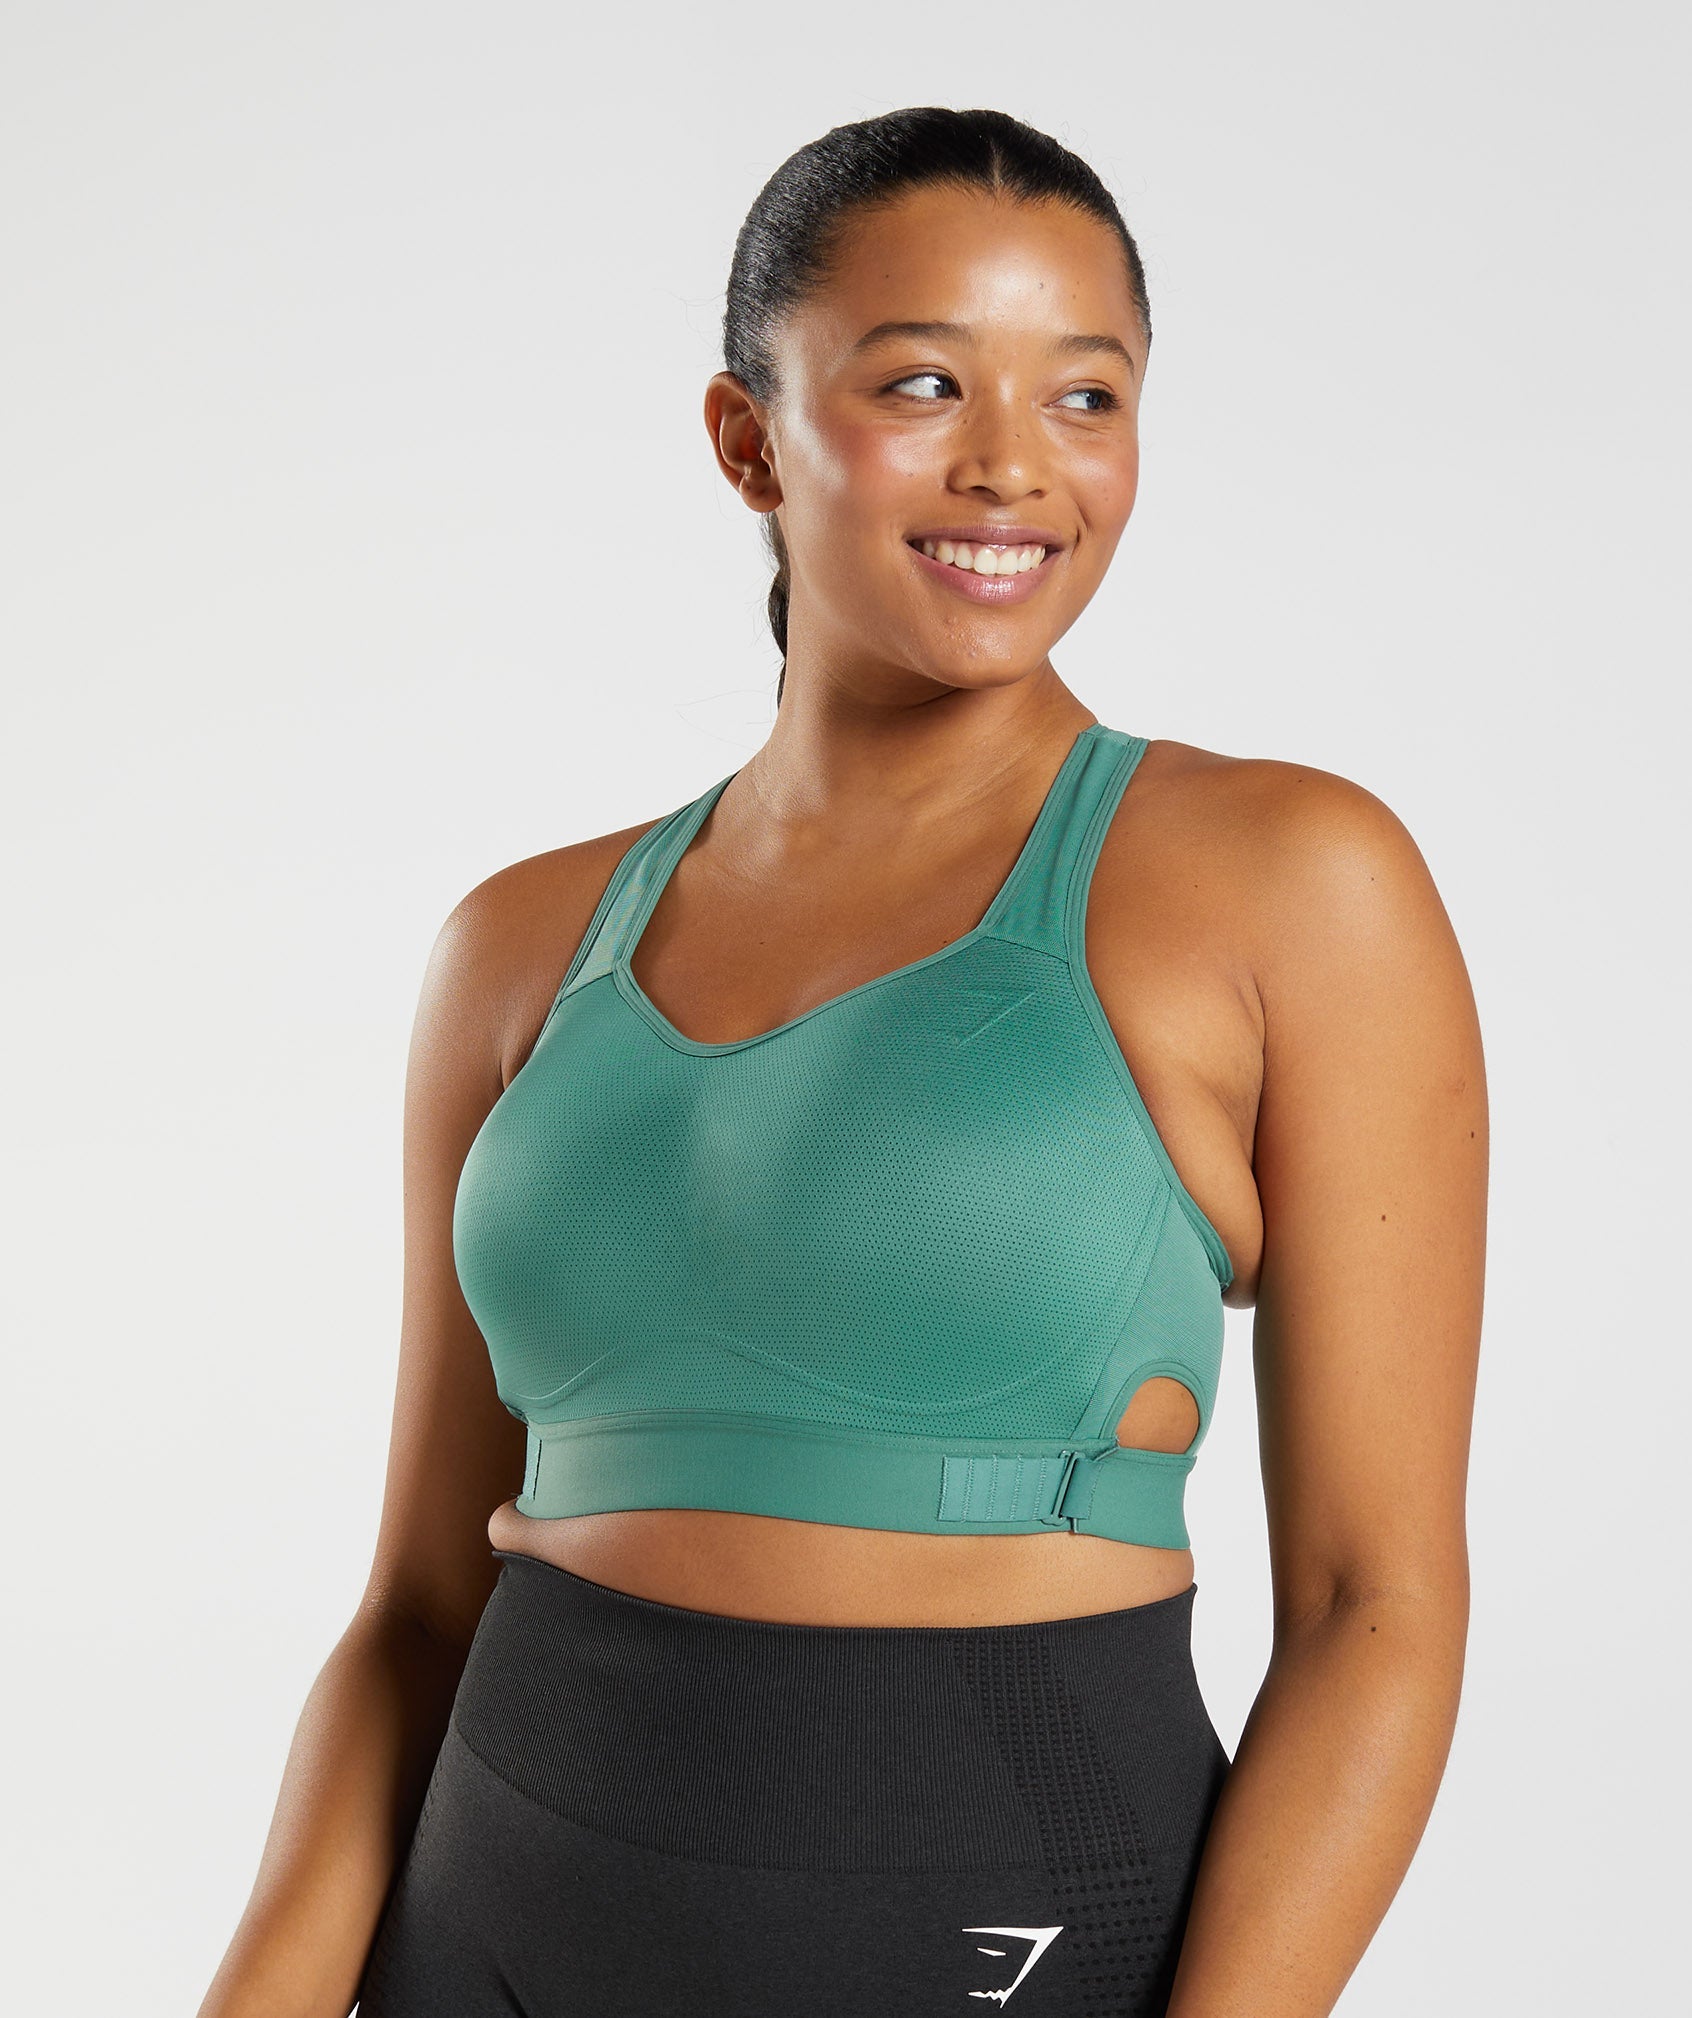 Sports Bras With Good Support